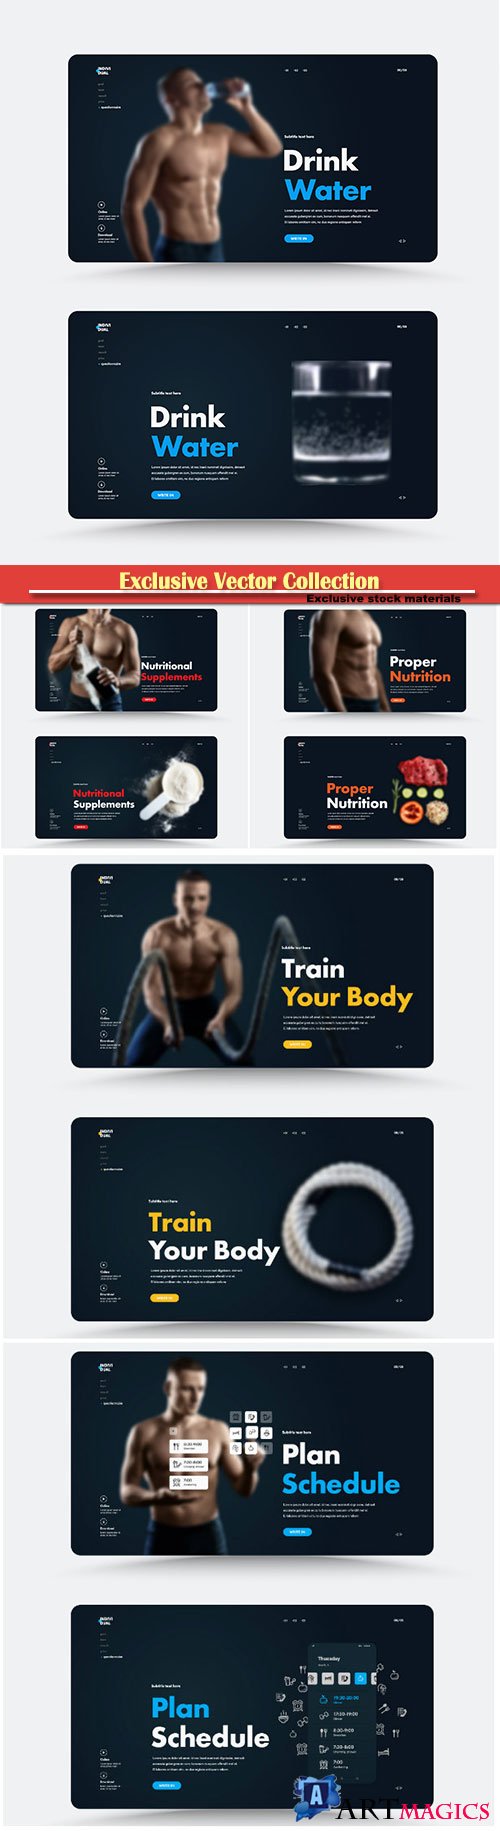 Vector website page design for a personal trainer or nutritionist